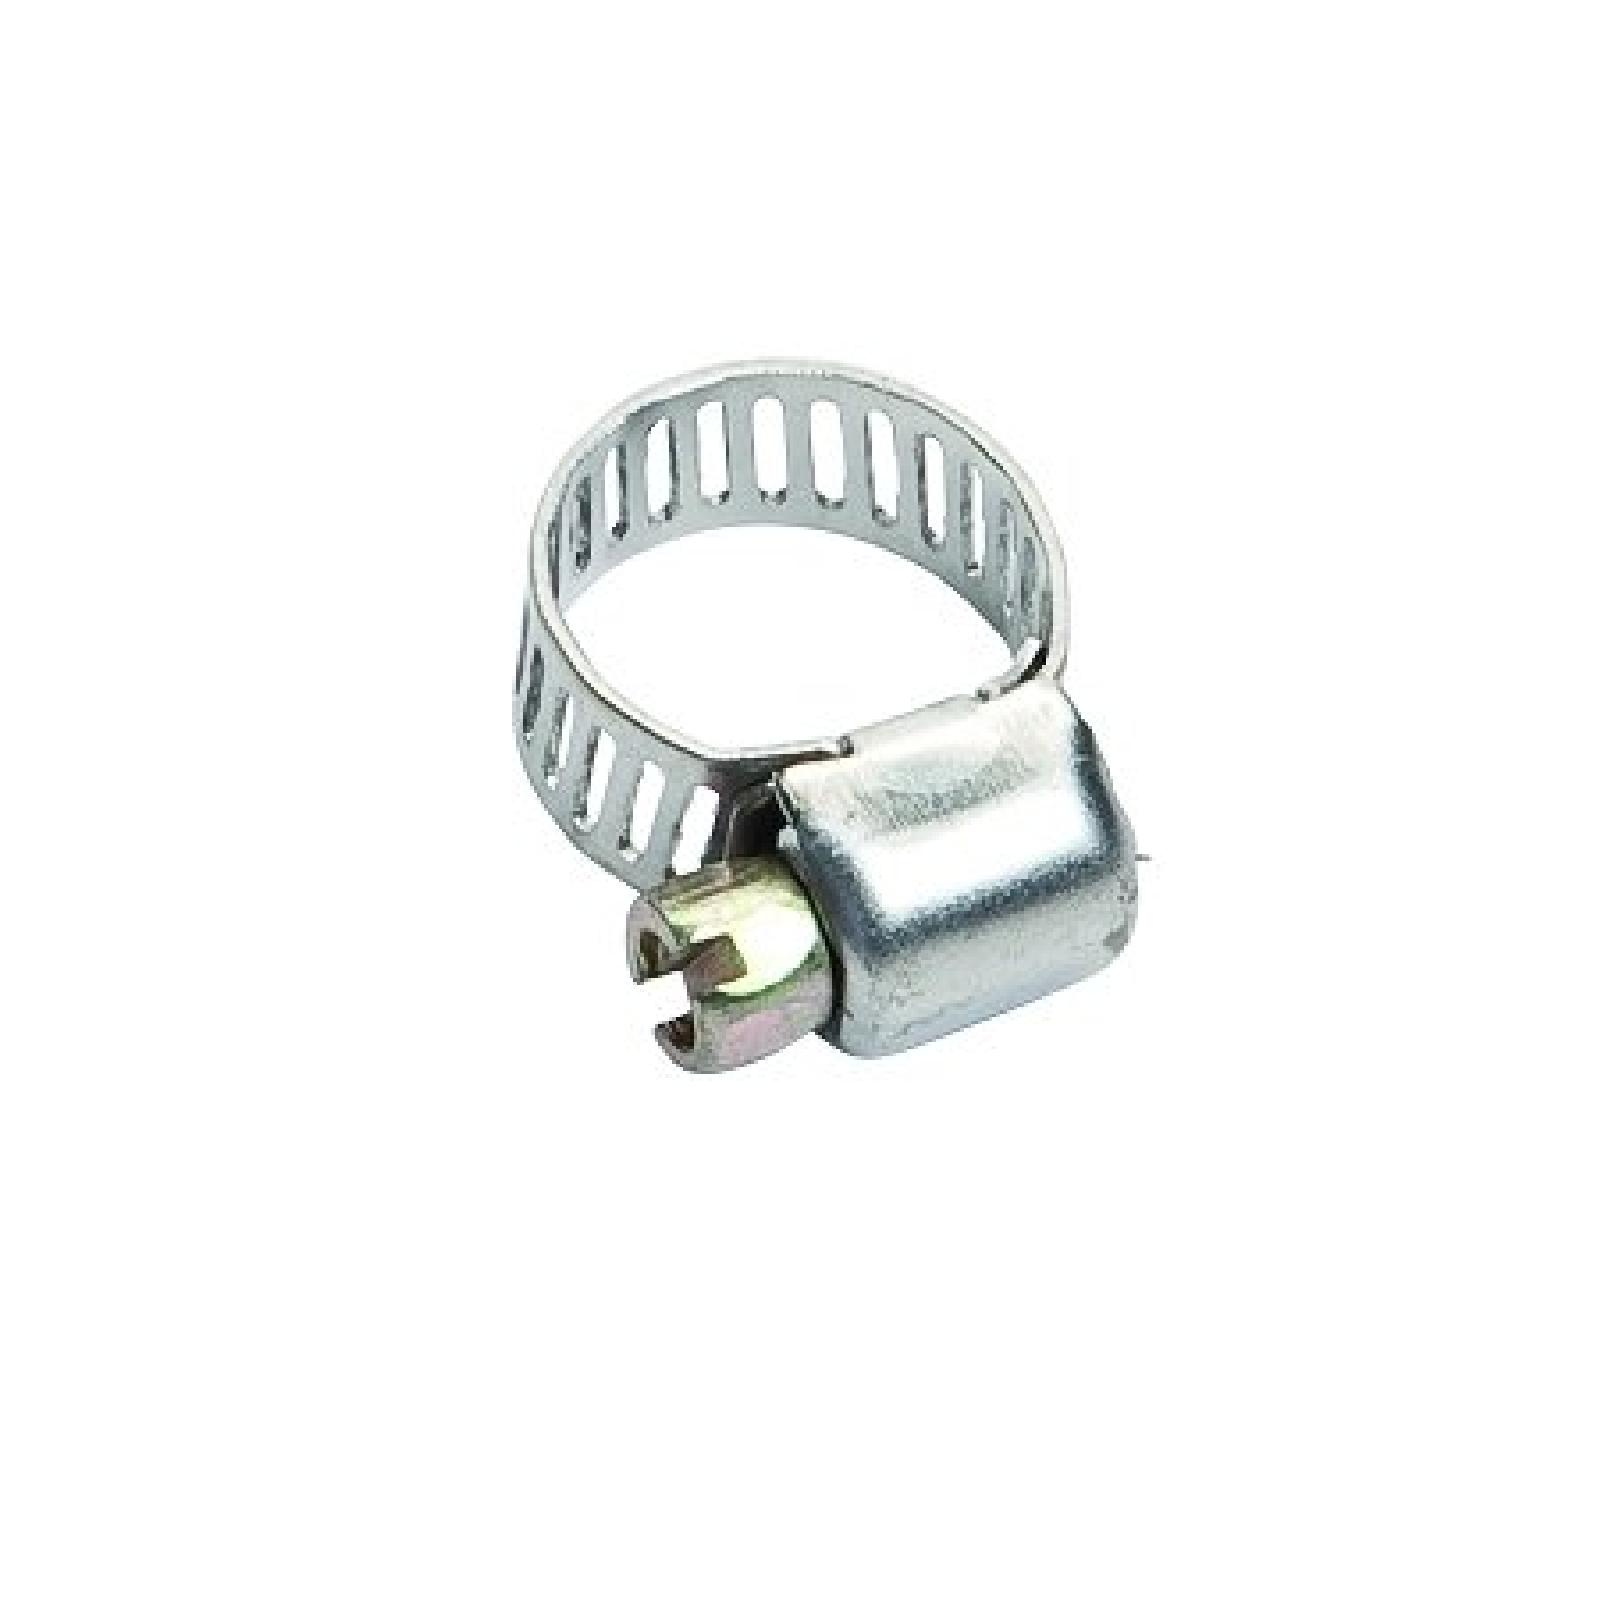 HOSE CLAMP 7/32 5/8IN part# 02-700 by Oregon - Click Image to Close